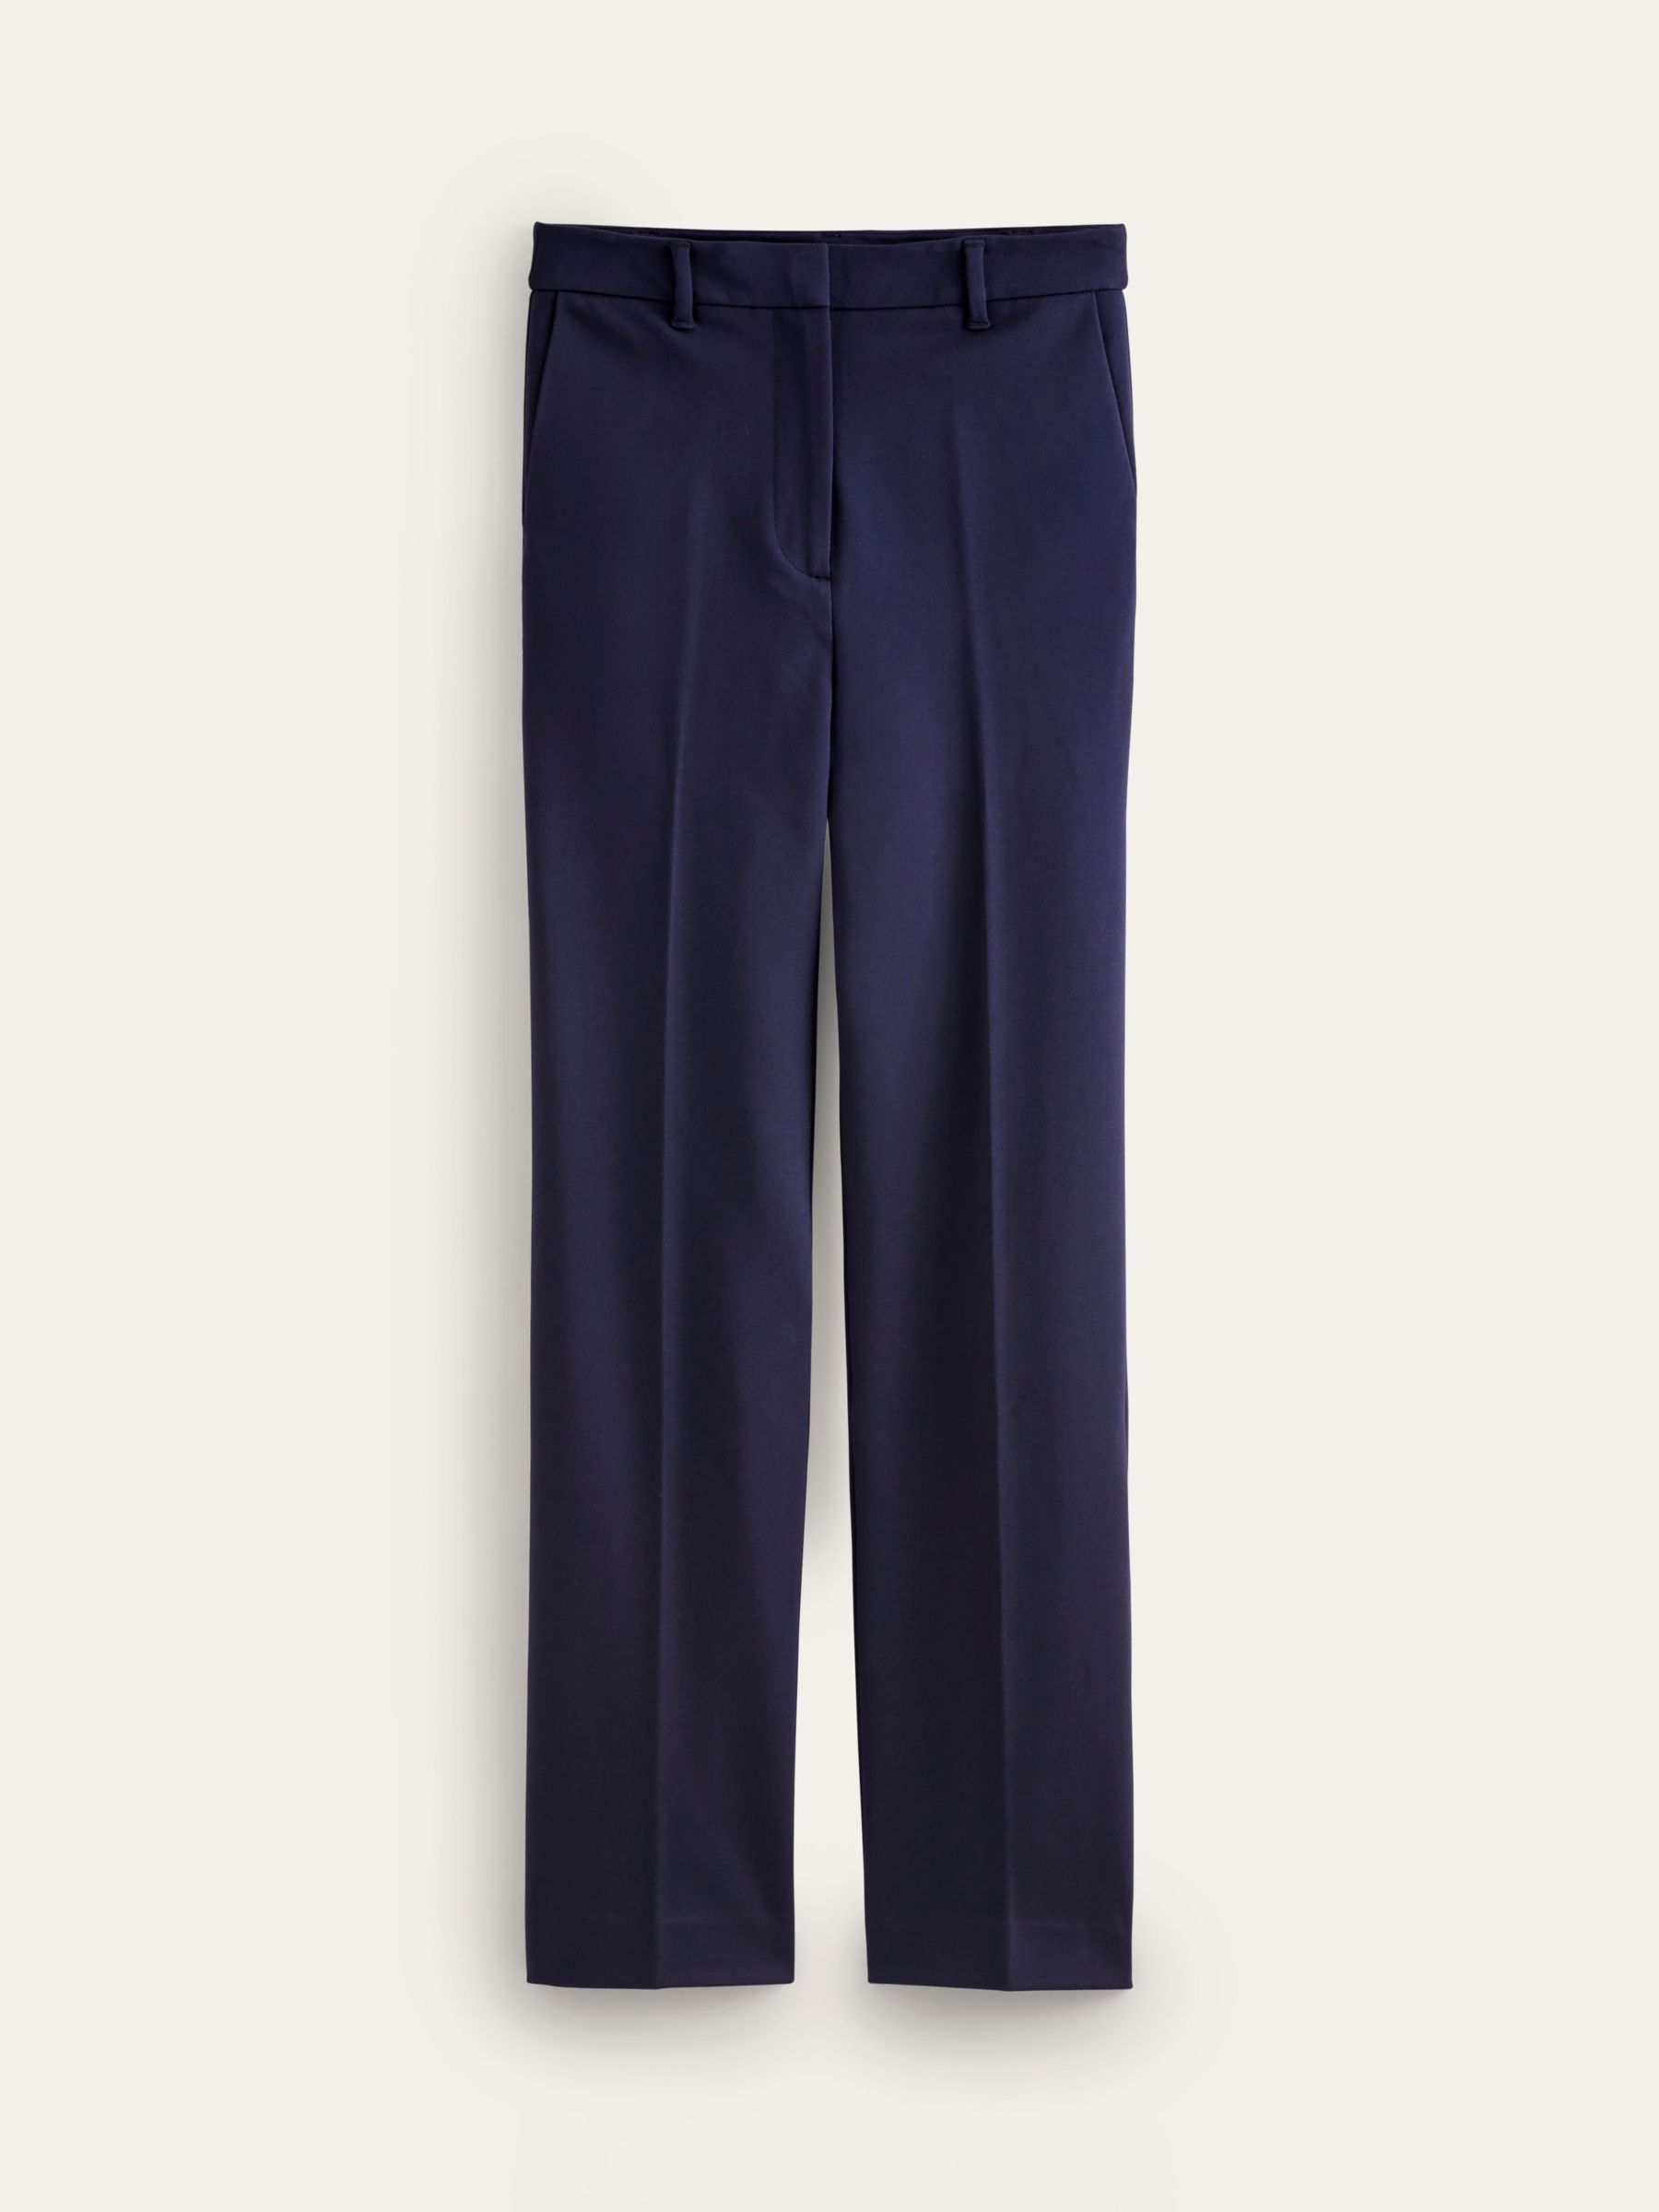 Boden Pimilico Ponte Trousers, Navy at John Lewis & Partners